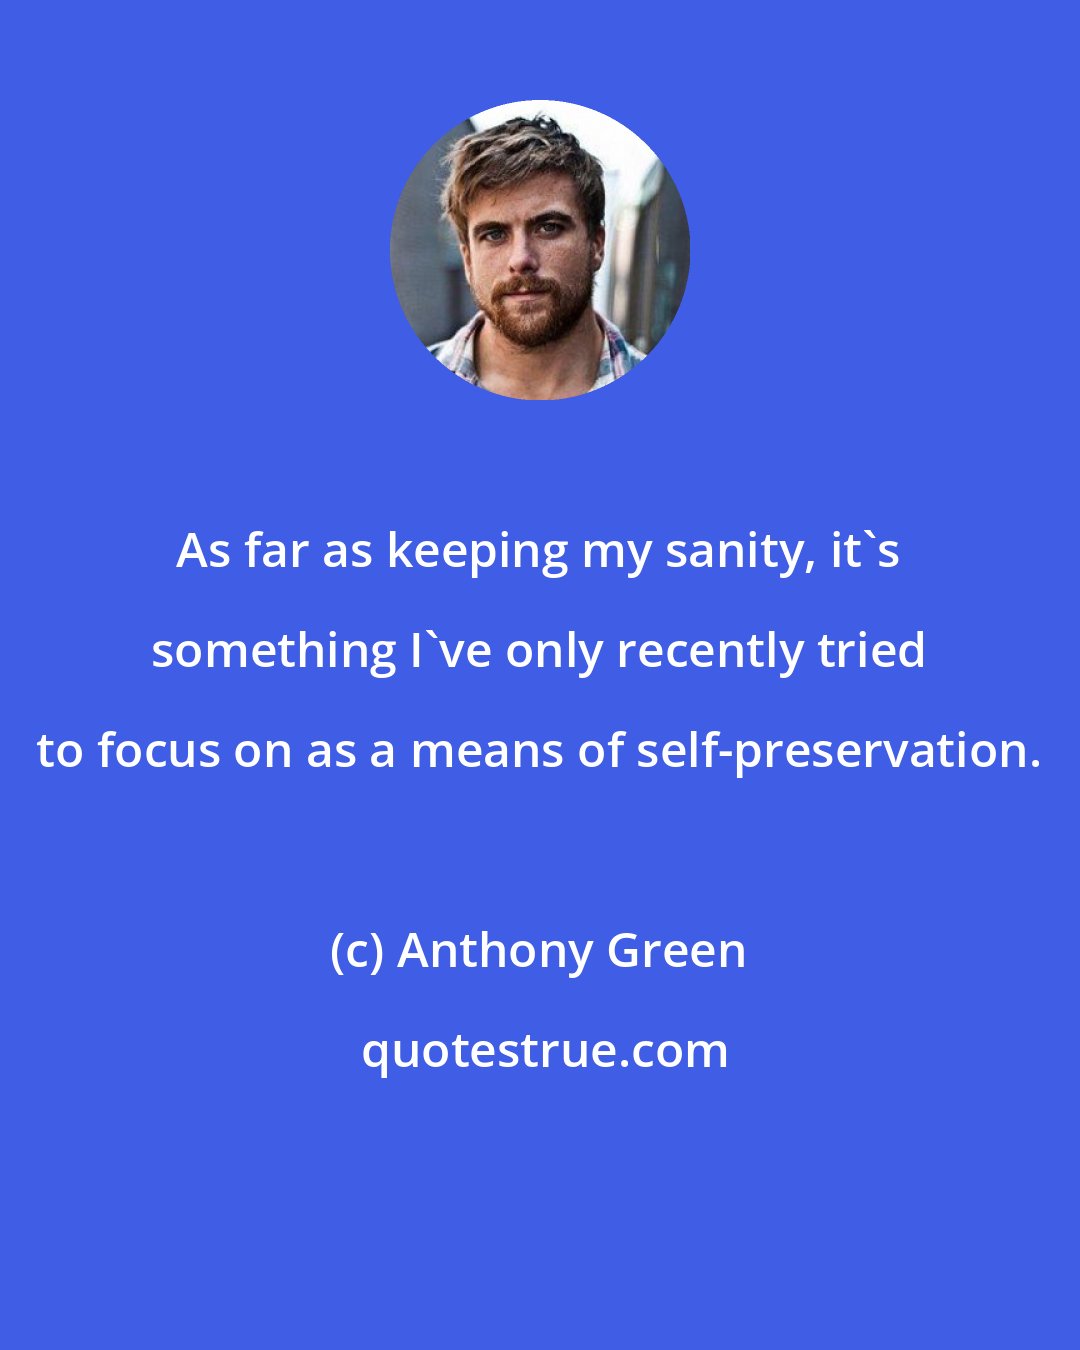 Anthony Green: As far as keeping my sanity, it's something I've only recently tried to focus on as a means of self-preservation.